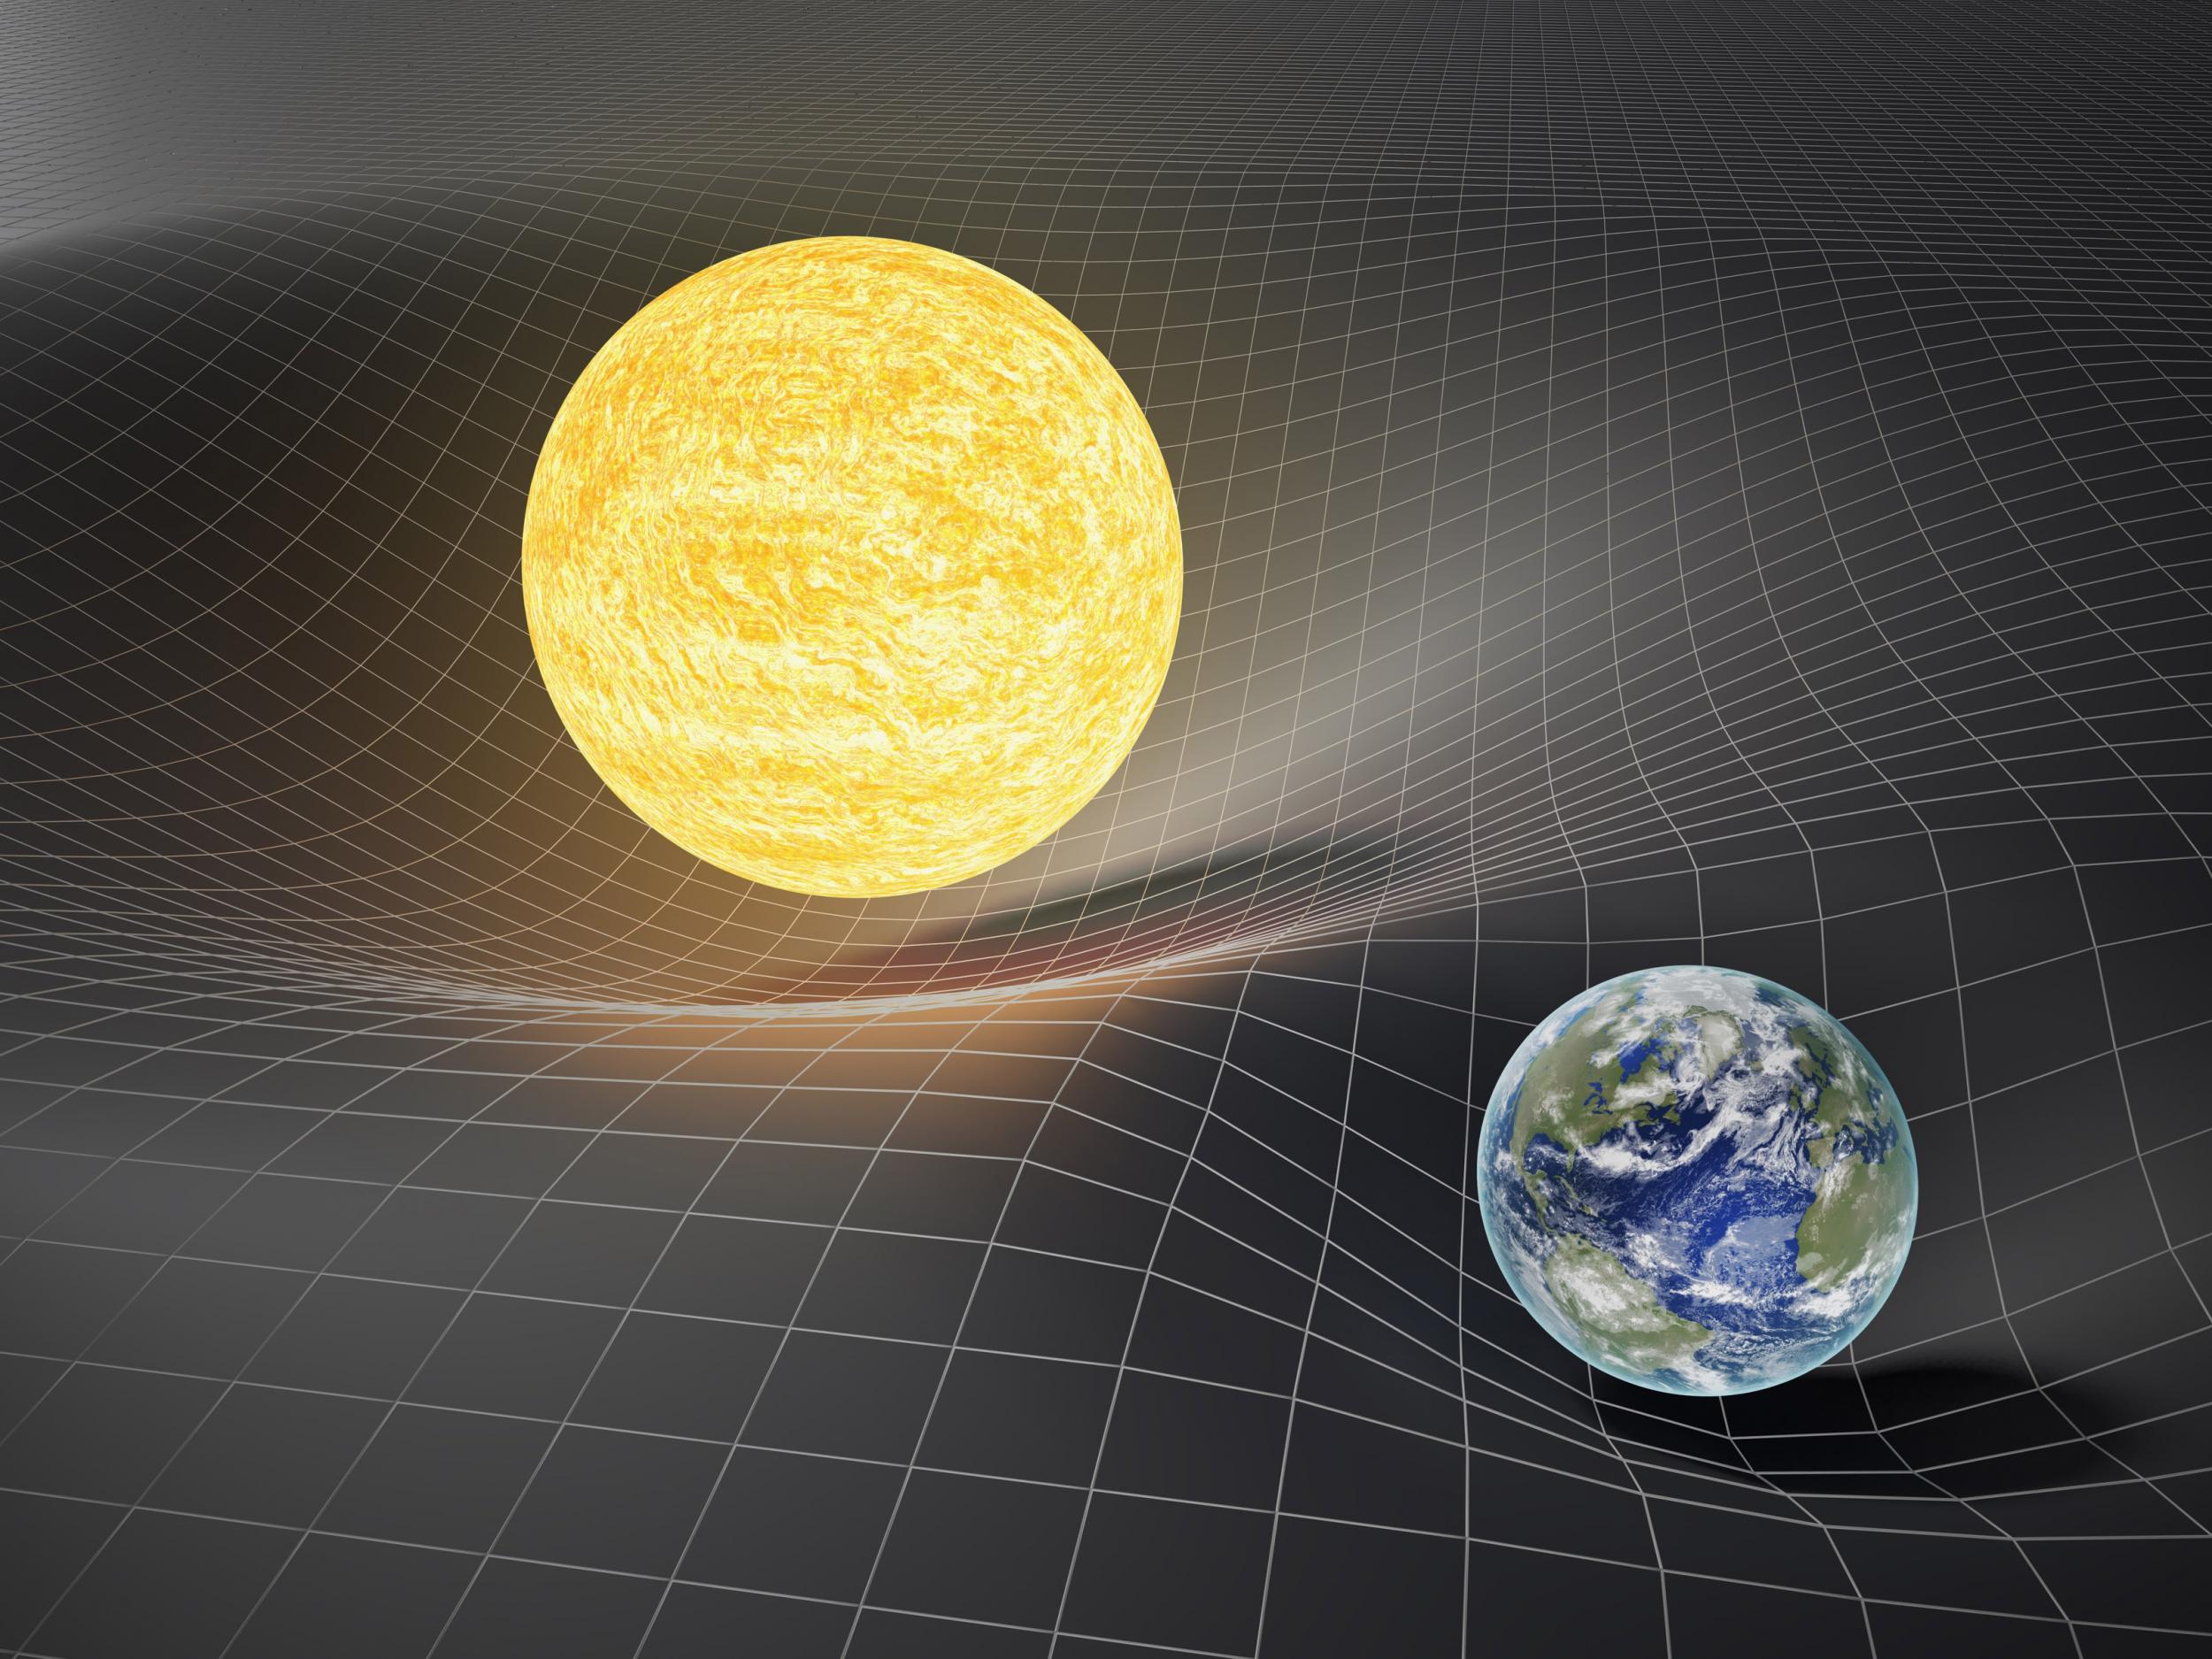 Through Einstein’s Theory of Relativity we can understand that gravity causes shifts in the fabric of space-time